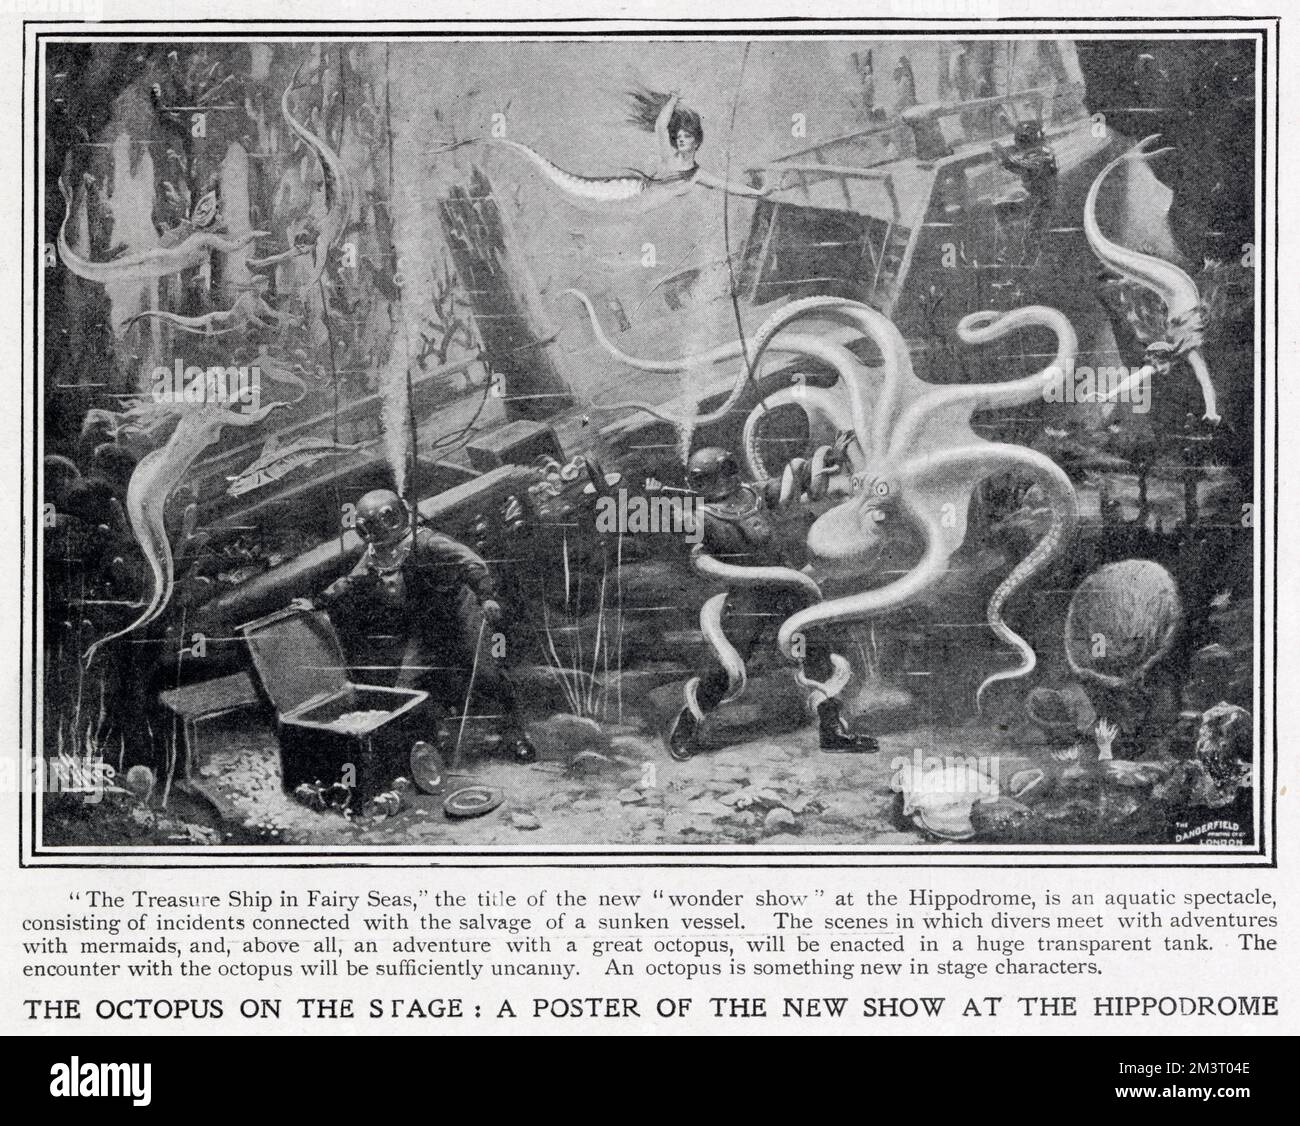 Poster for the latest 'wonder show' at the London Hippodrome, for Christmas 1906. The Treasure Ship in Fairy Seas featured several scenes played under water in the Hippodrome's transparent tank. Swimmers the Finney sisters and Annette Kellerman starred as mermaids, and the octopus was 'something new in stage characters'.      Date: 1906 Stock Photo